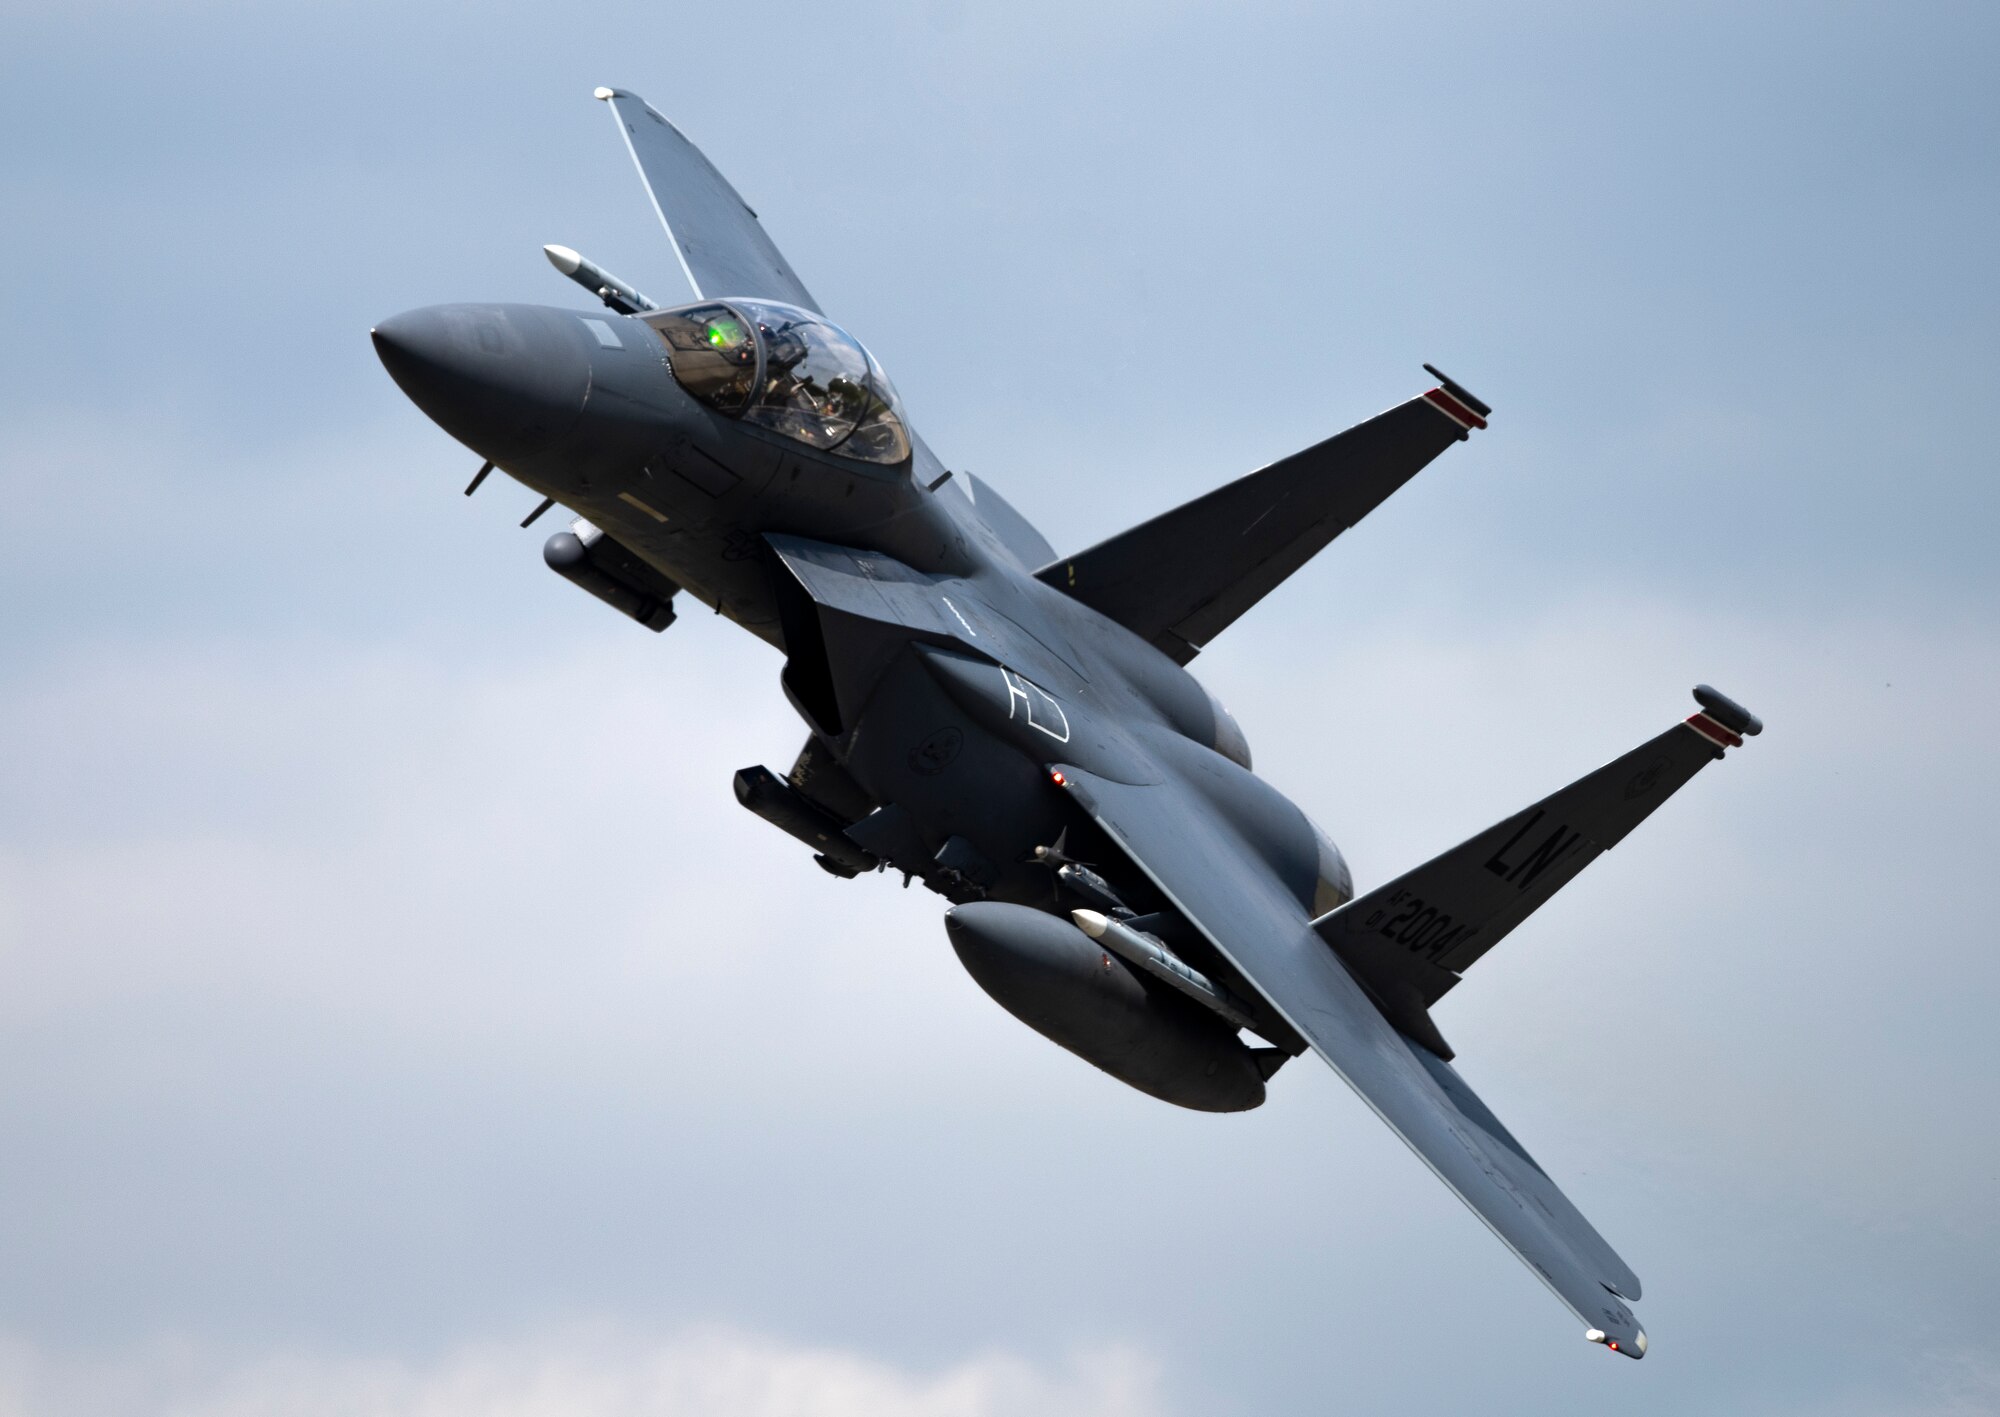 A U.S. Air Force F-15E Strike Eagle, assigned to the 494th  Fighter Squadron, flies overhead at Royal Air Force Lakenheath, England, Sept. 1, 2020. The 48th Fighter Wing conducts routine training in order to maintain combat readiness and safeguard U.S. national interests and the collective defense of allies and partners. (U.S. Air Force photo by Airman 1st Class Jessi Monte)